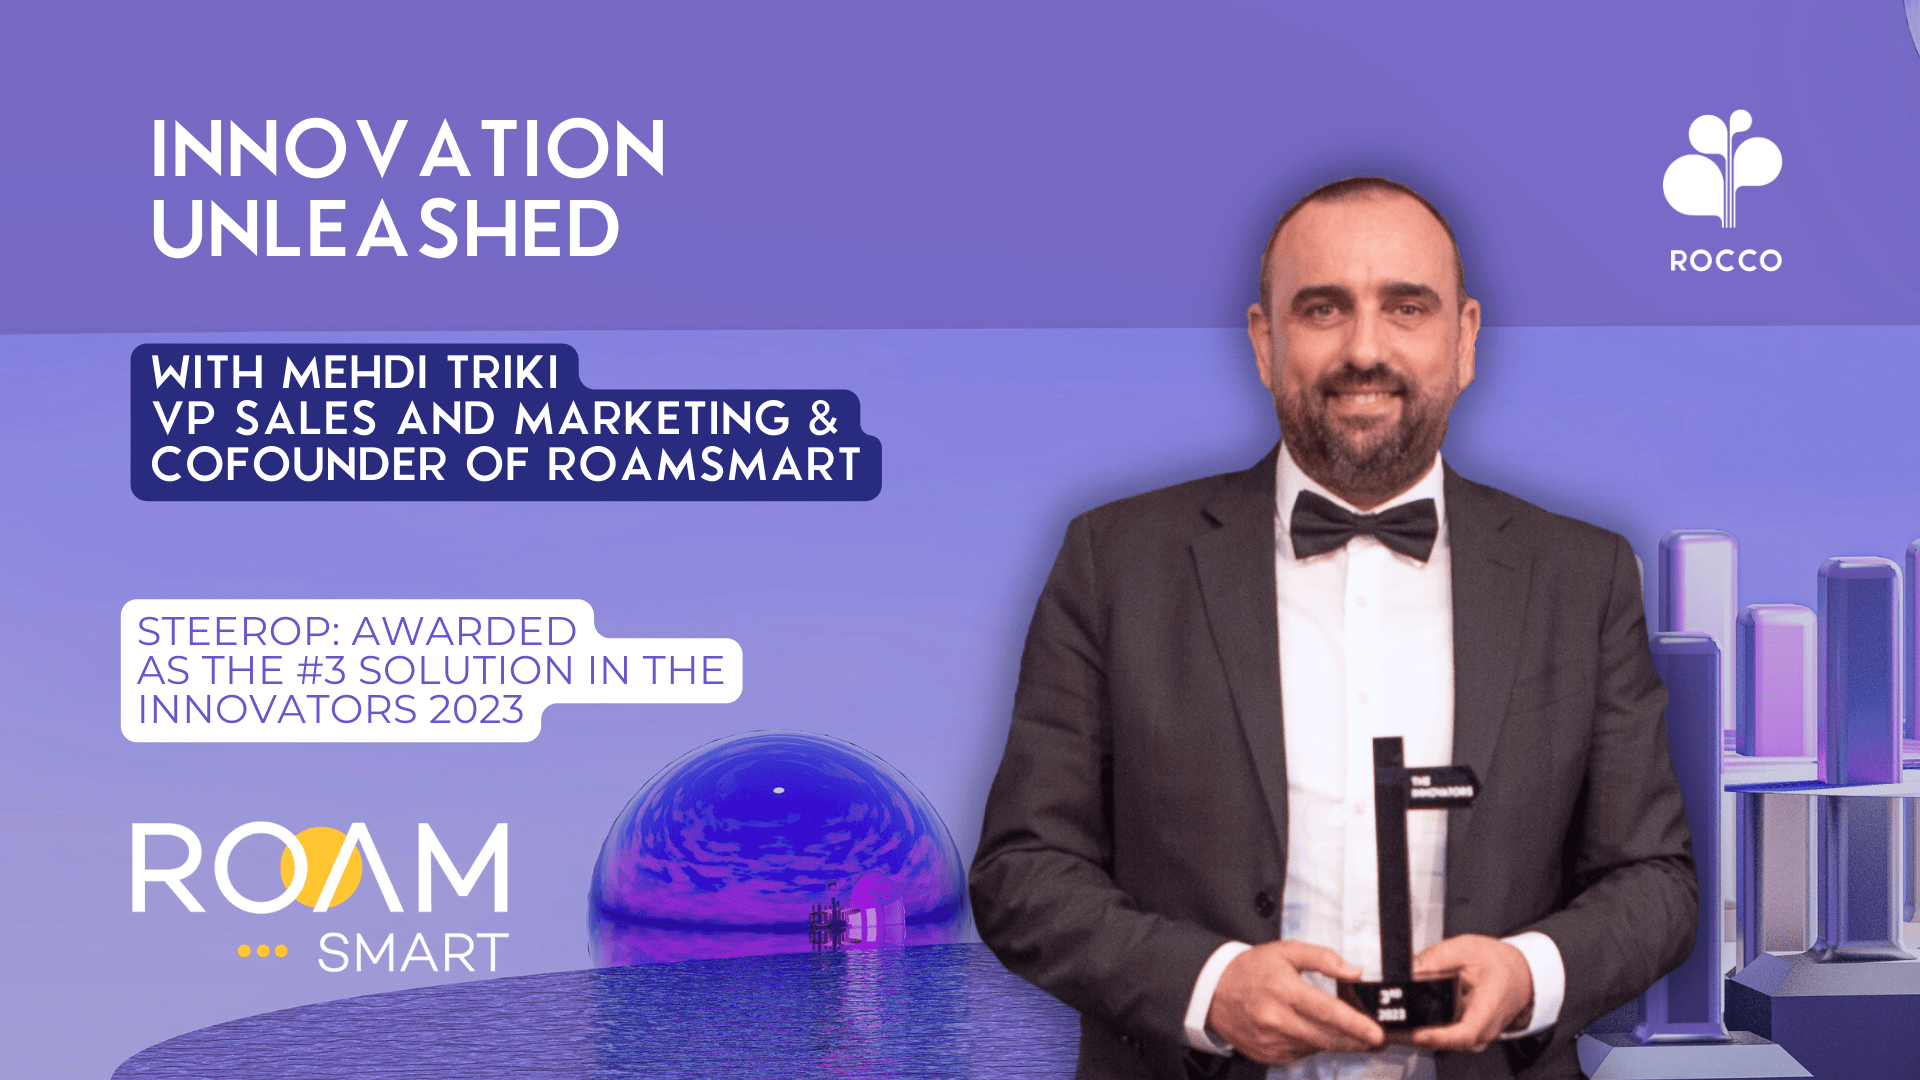 Innovation Unleashed with Mehdi Triki